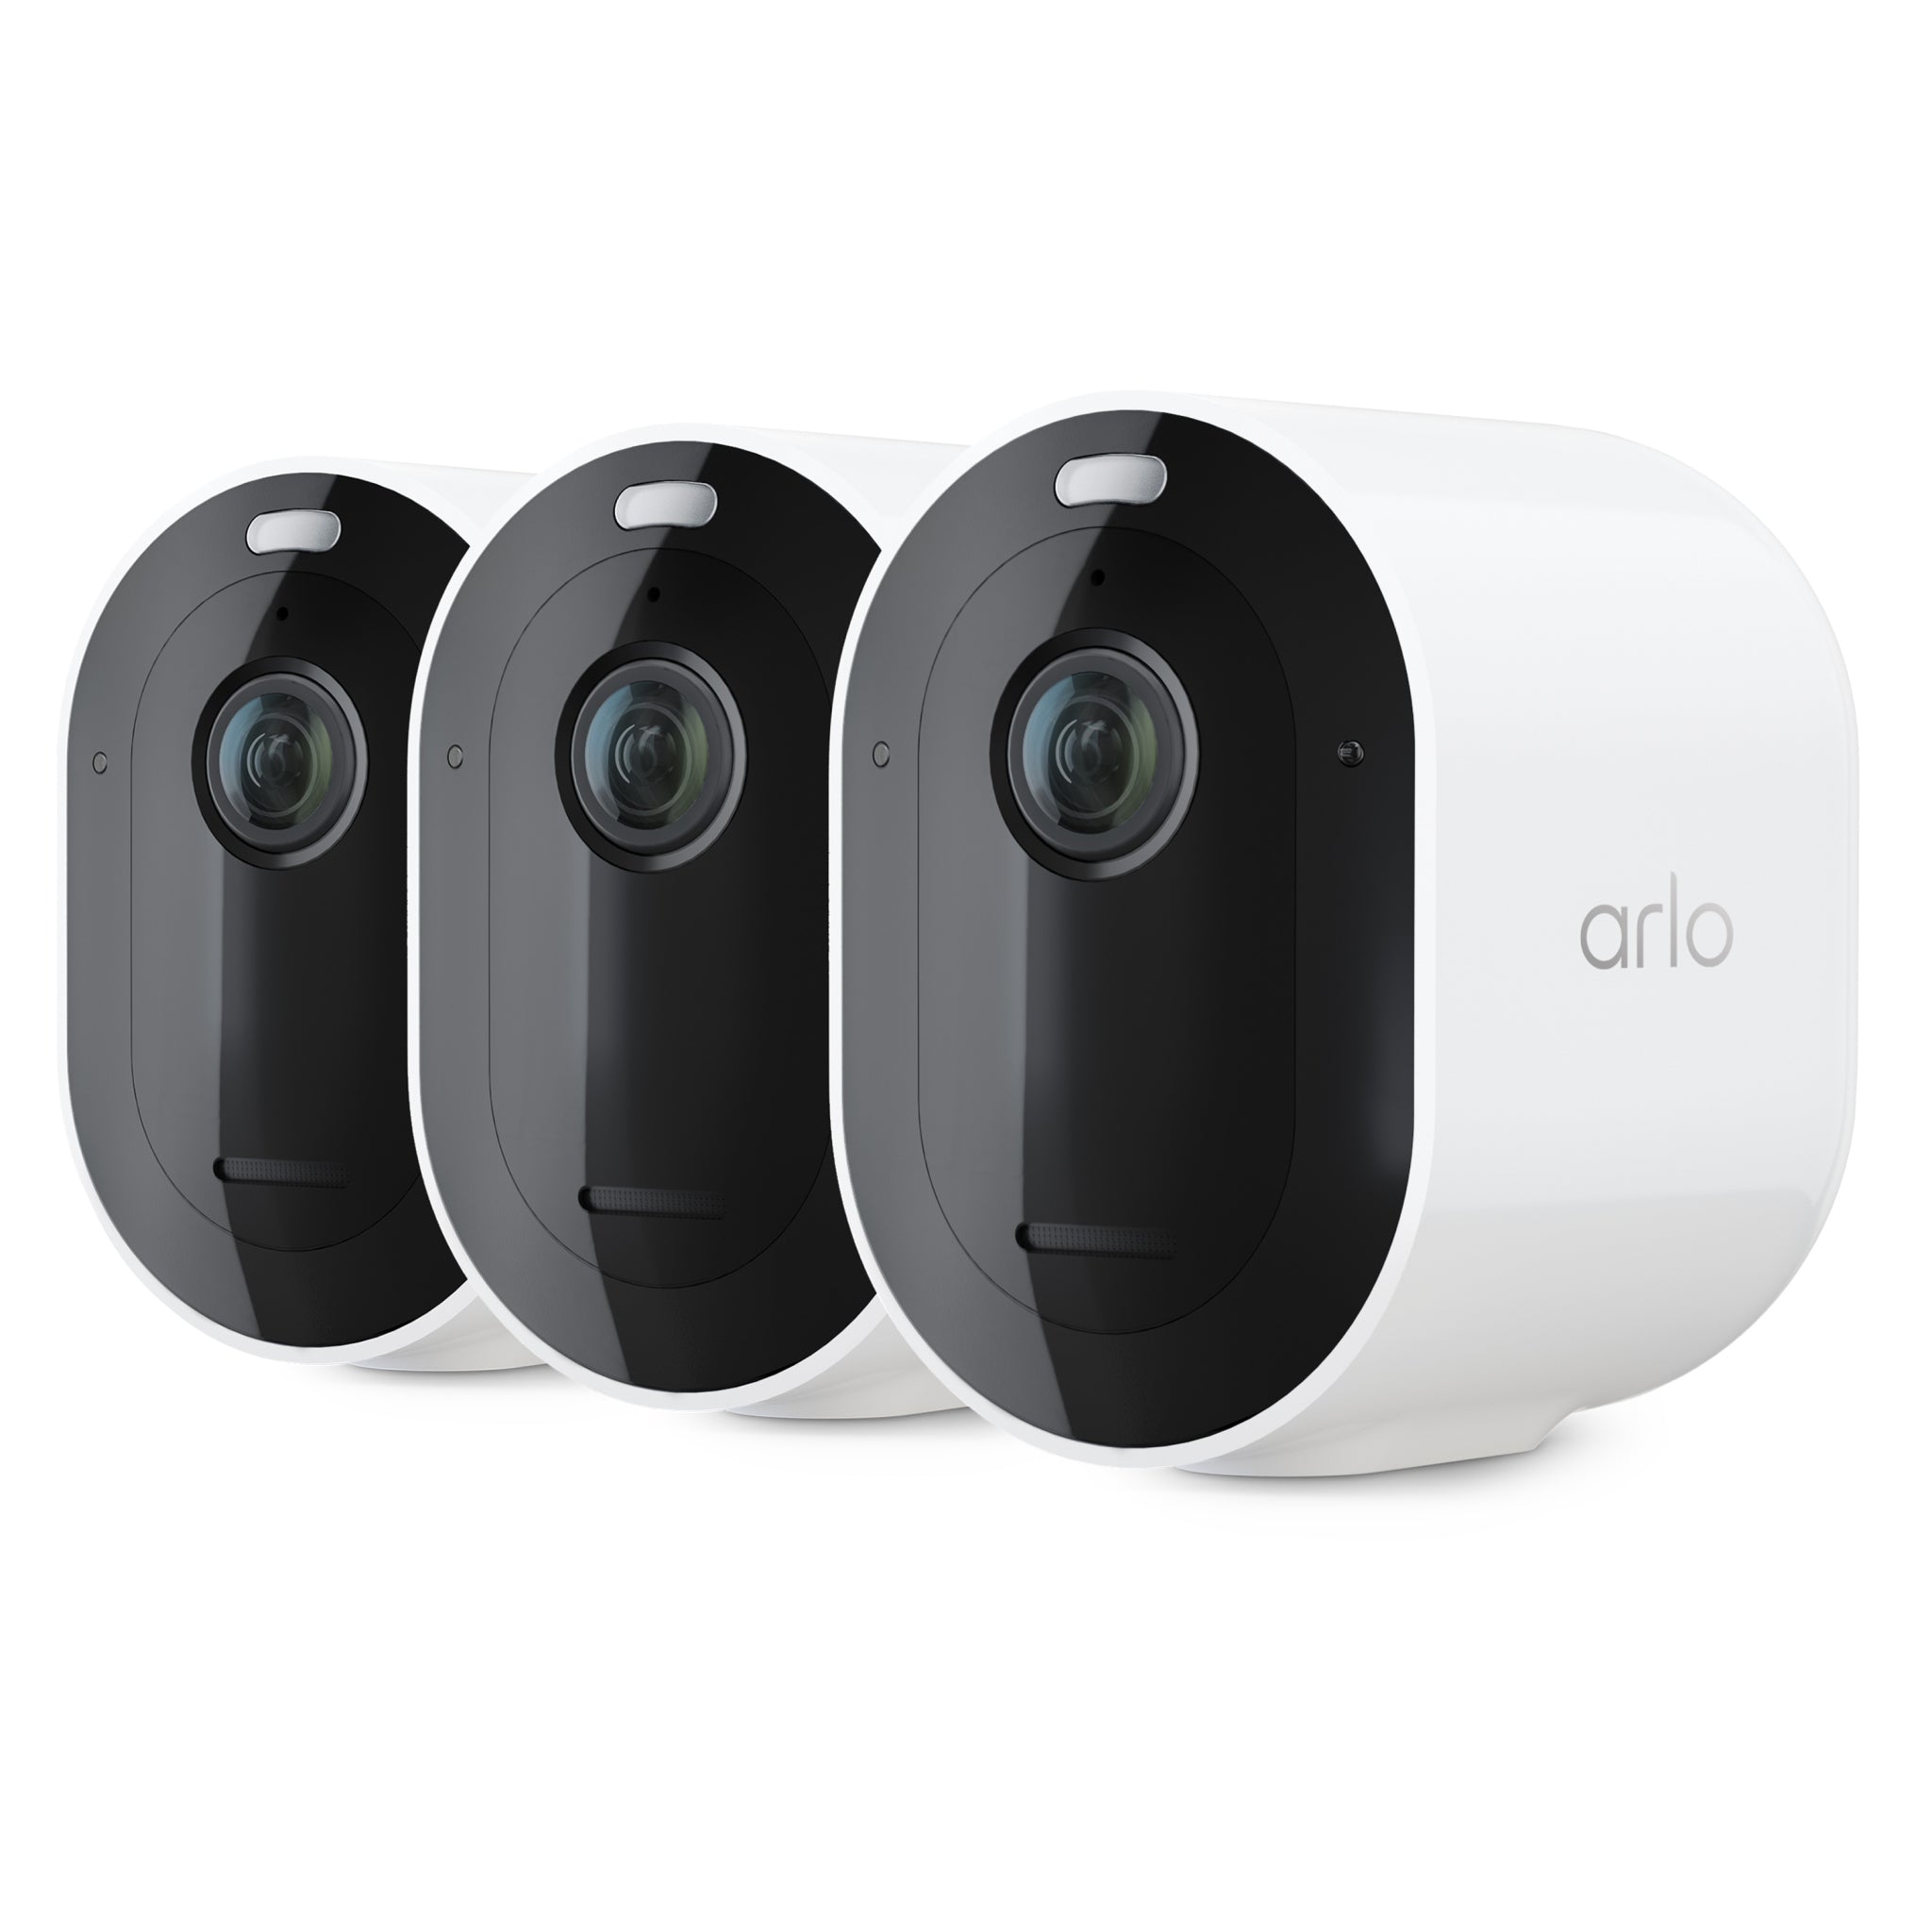 Arlo VMC4350P-100NAR Pro 4 Spotlight Camera 3 Pack Security HDR Color Night Vision 2 Way Audio WiFi No Hub Needed White - Certified Refurbished